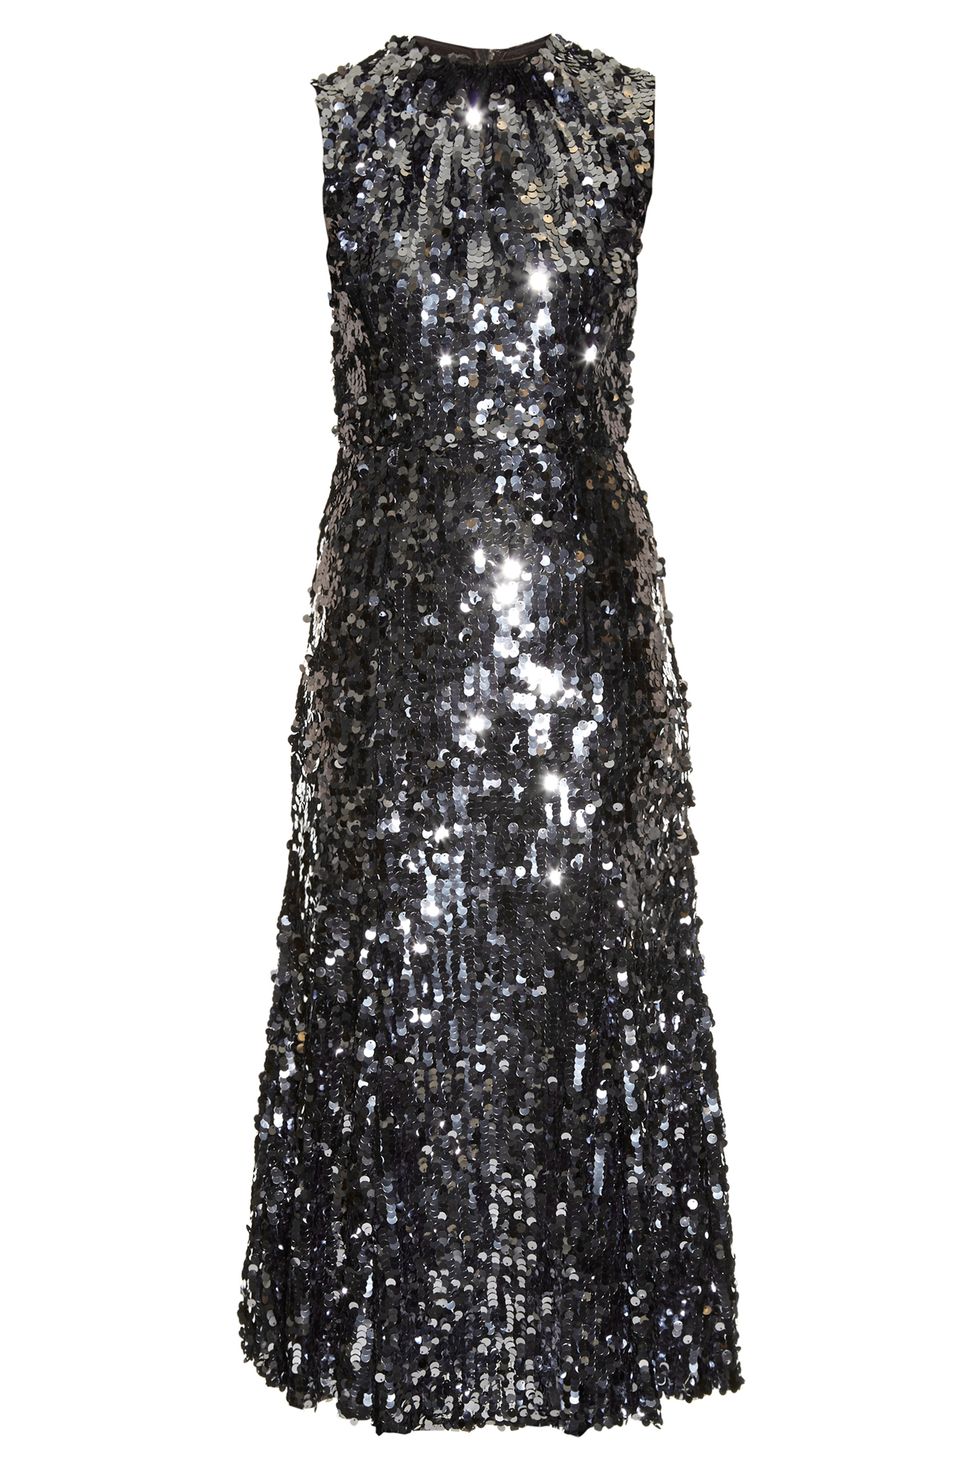 New Year's Eve dresses,New Year's Eve outfits, what to wear for New Year's Eve